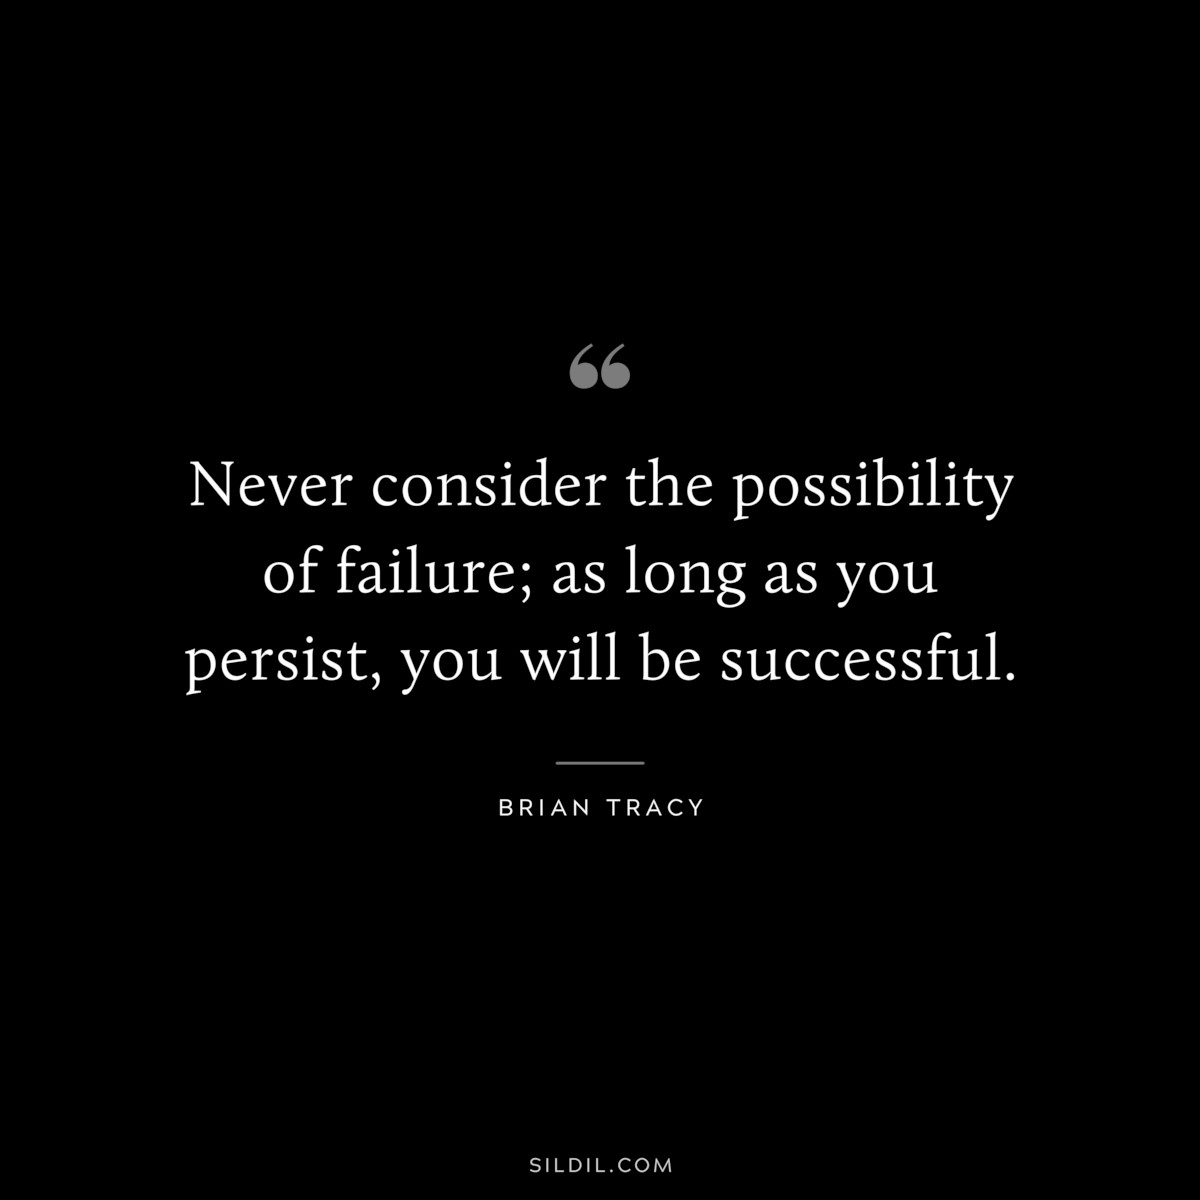 Never consider the possibility of failure; as long as you persist, you will be successful. ― Brian Tracy